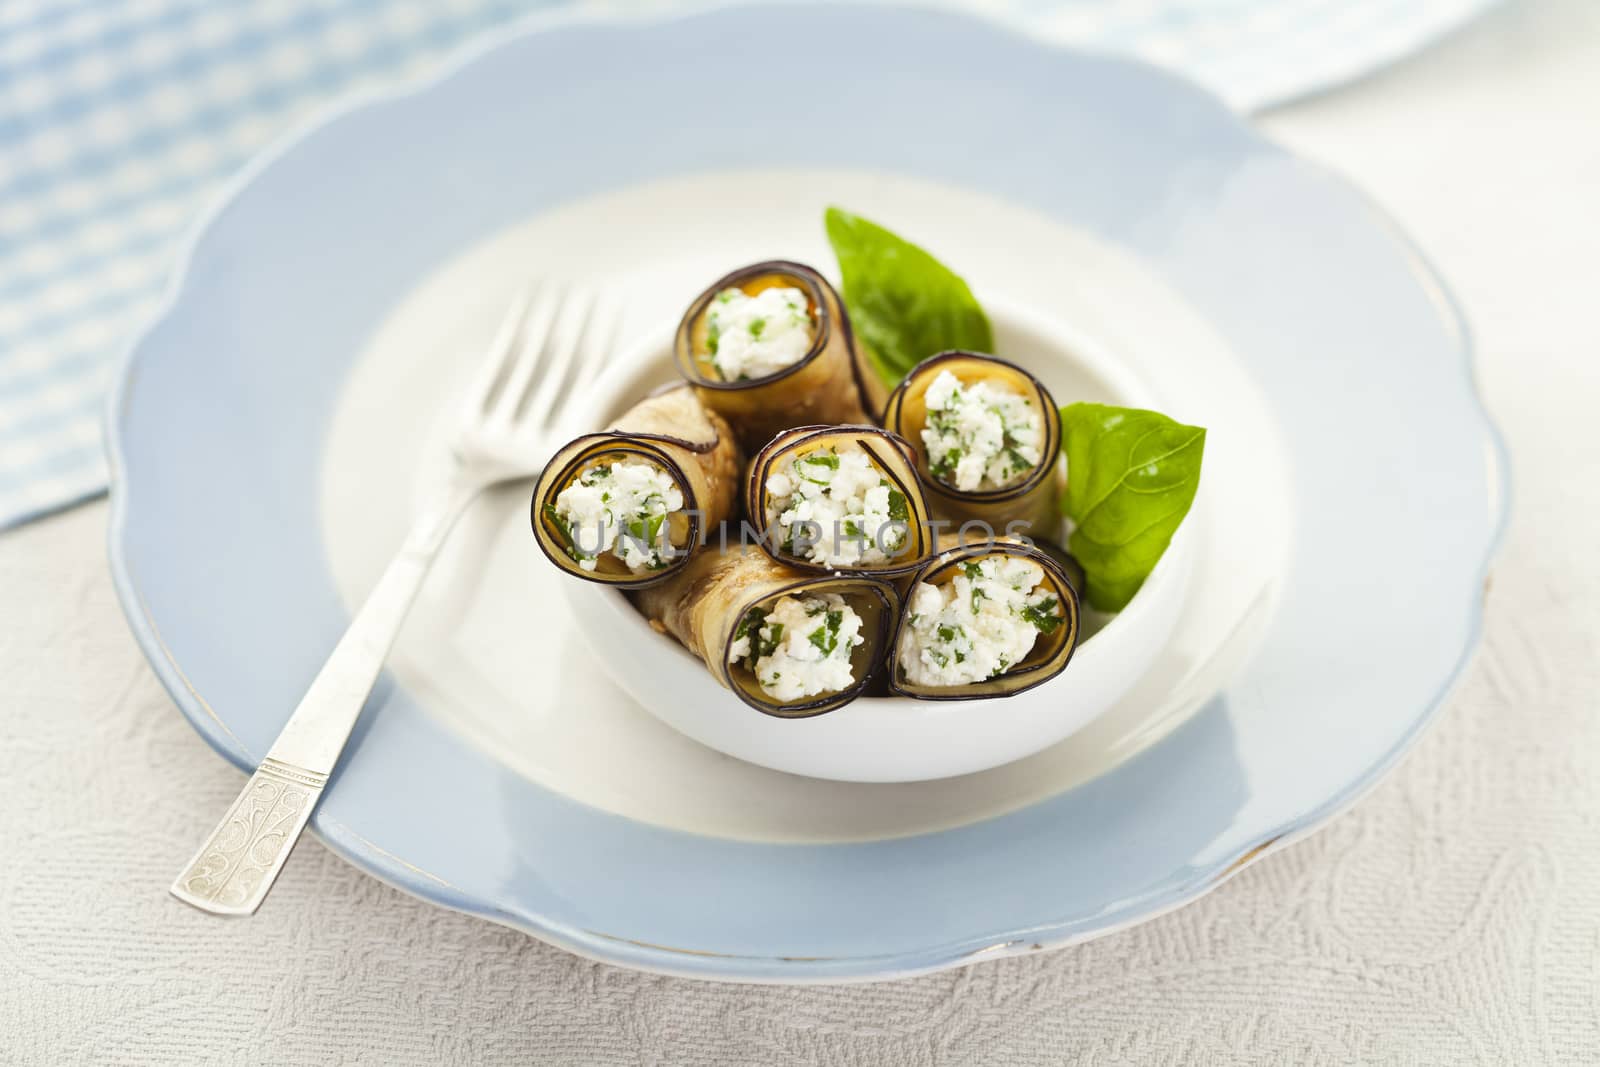 Tasty eggplant rolls stuffed with cottage cheese